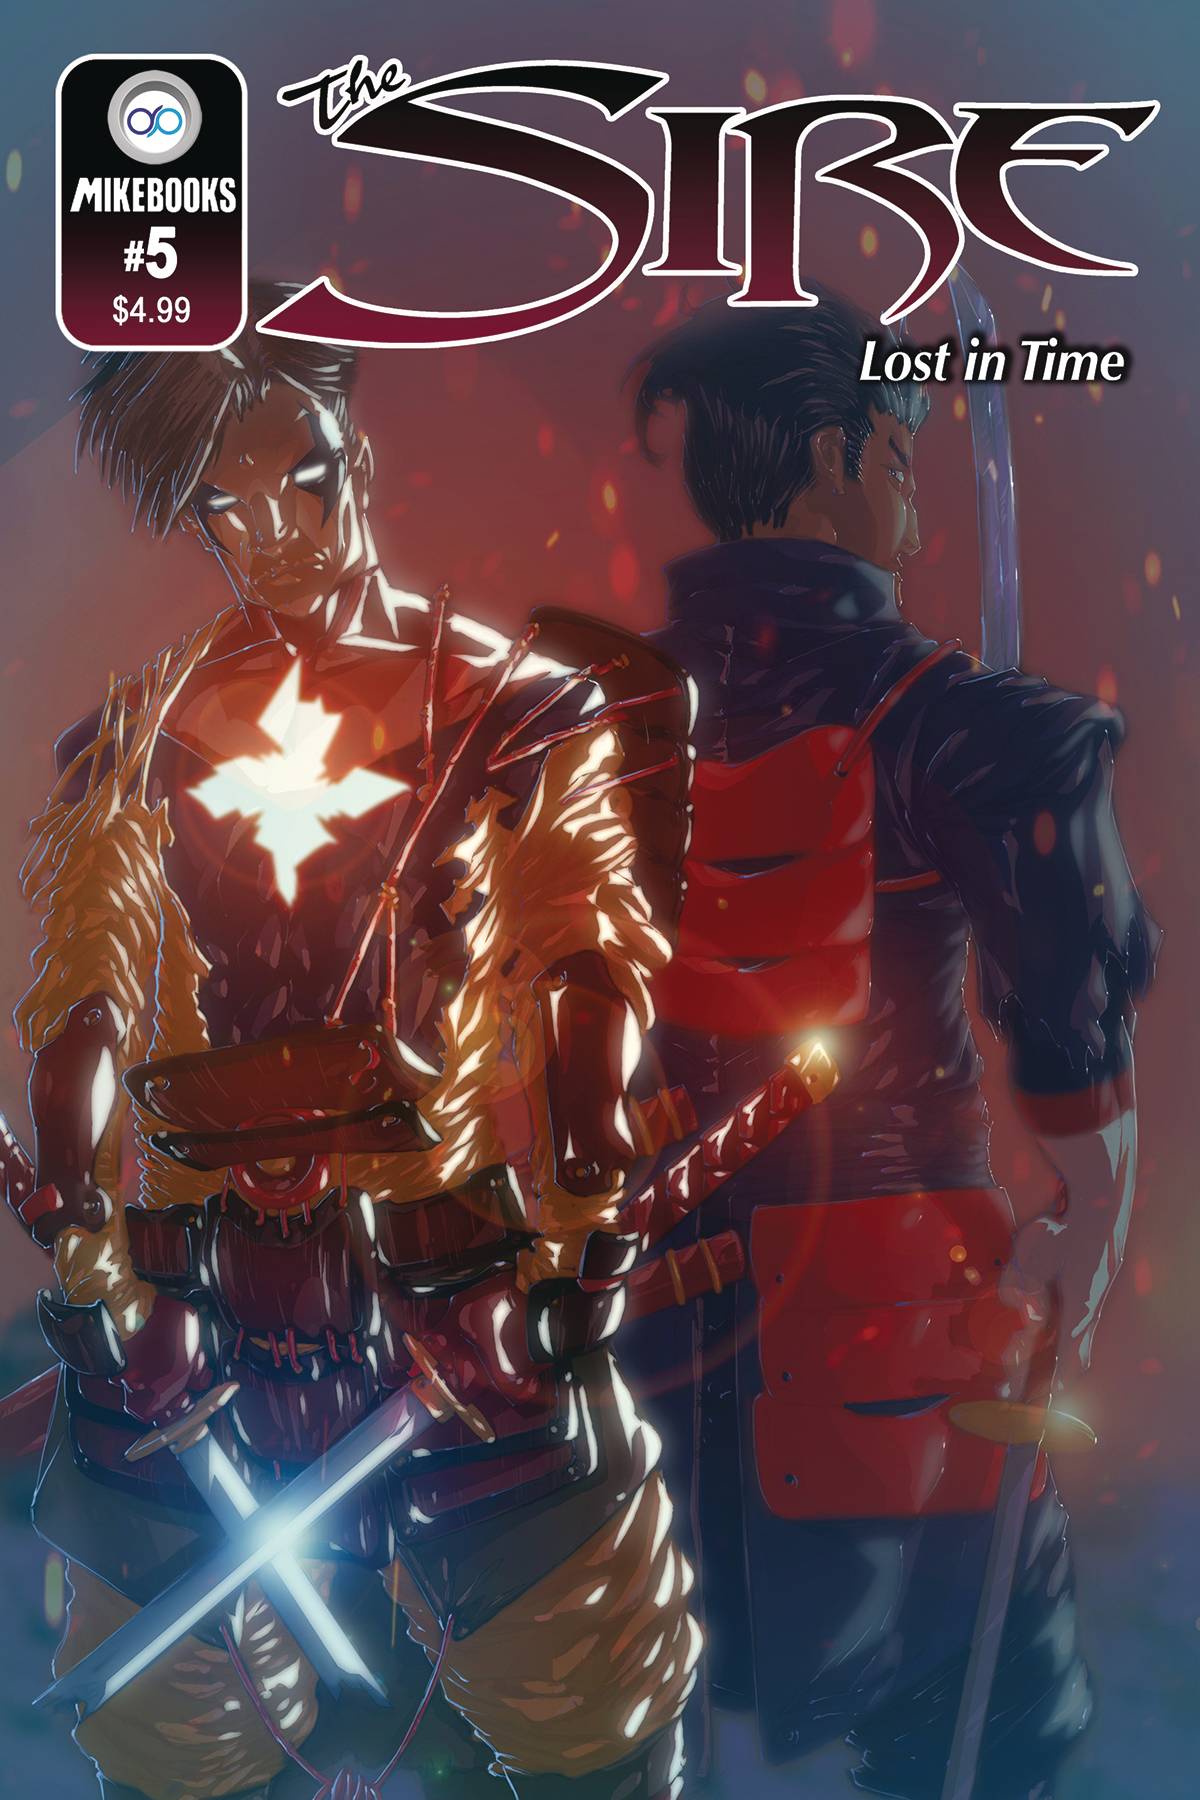 SIRE LOST IN TIME #5 (OF 5) (C: 0-1-1) COMIC COVER